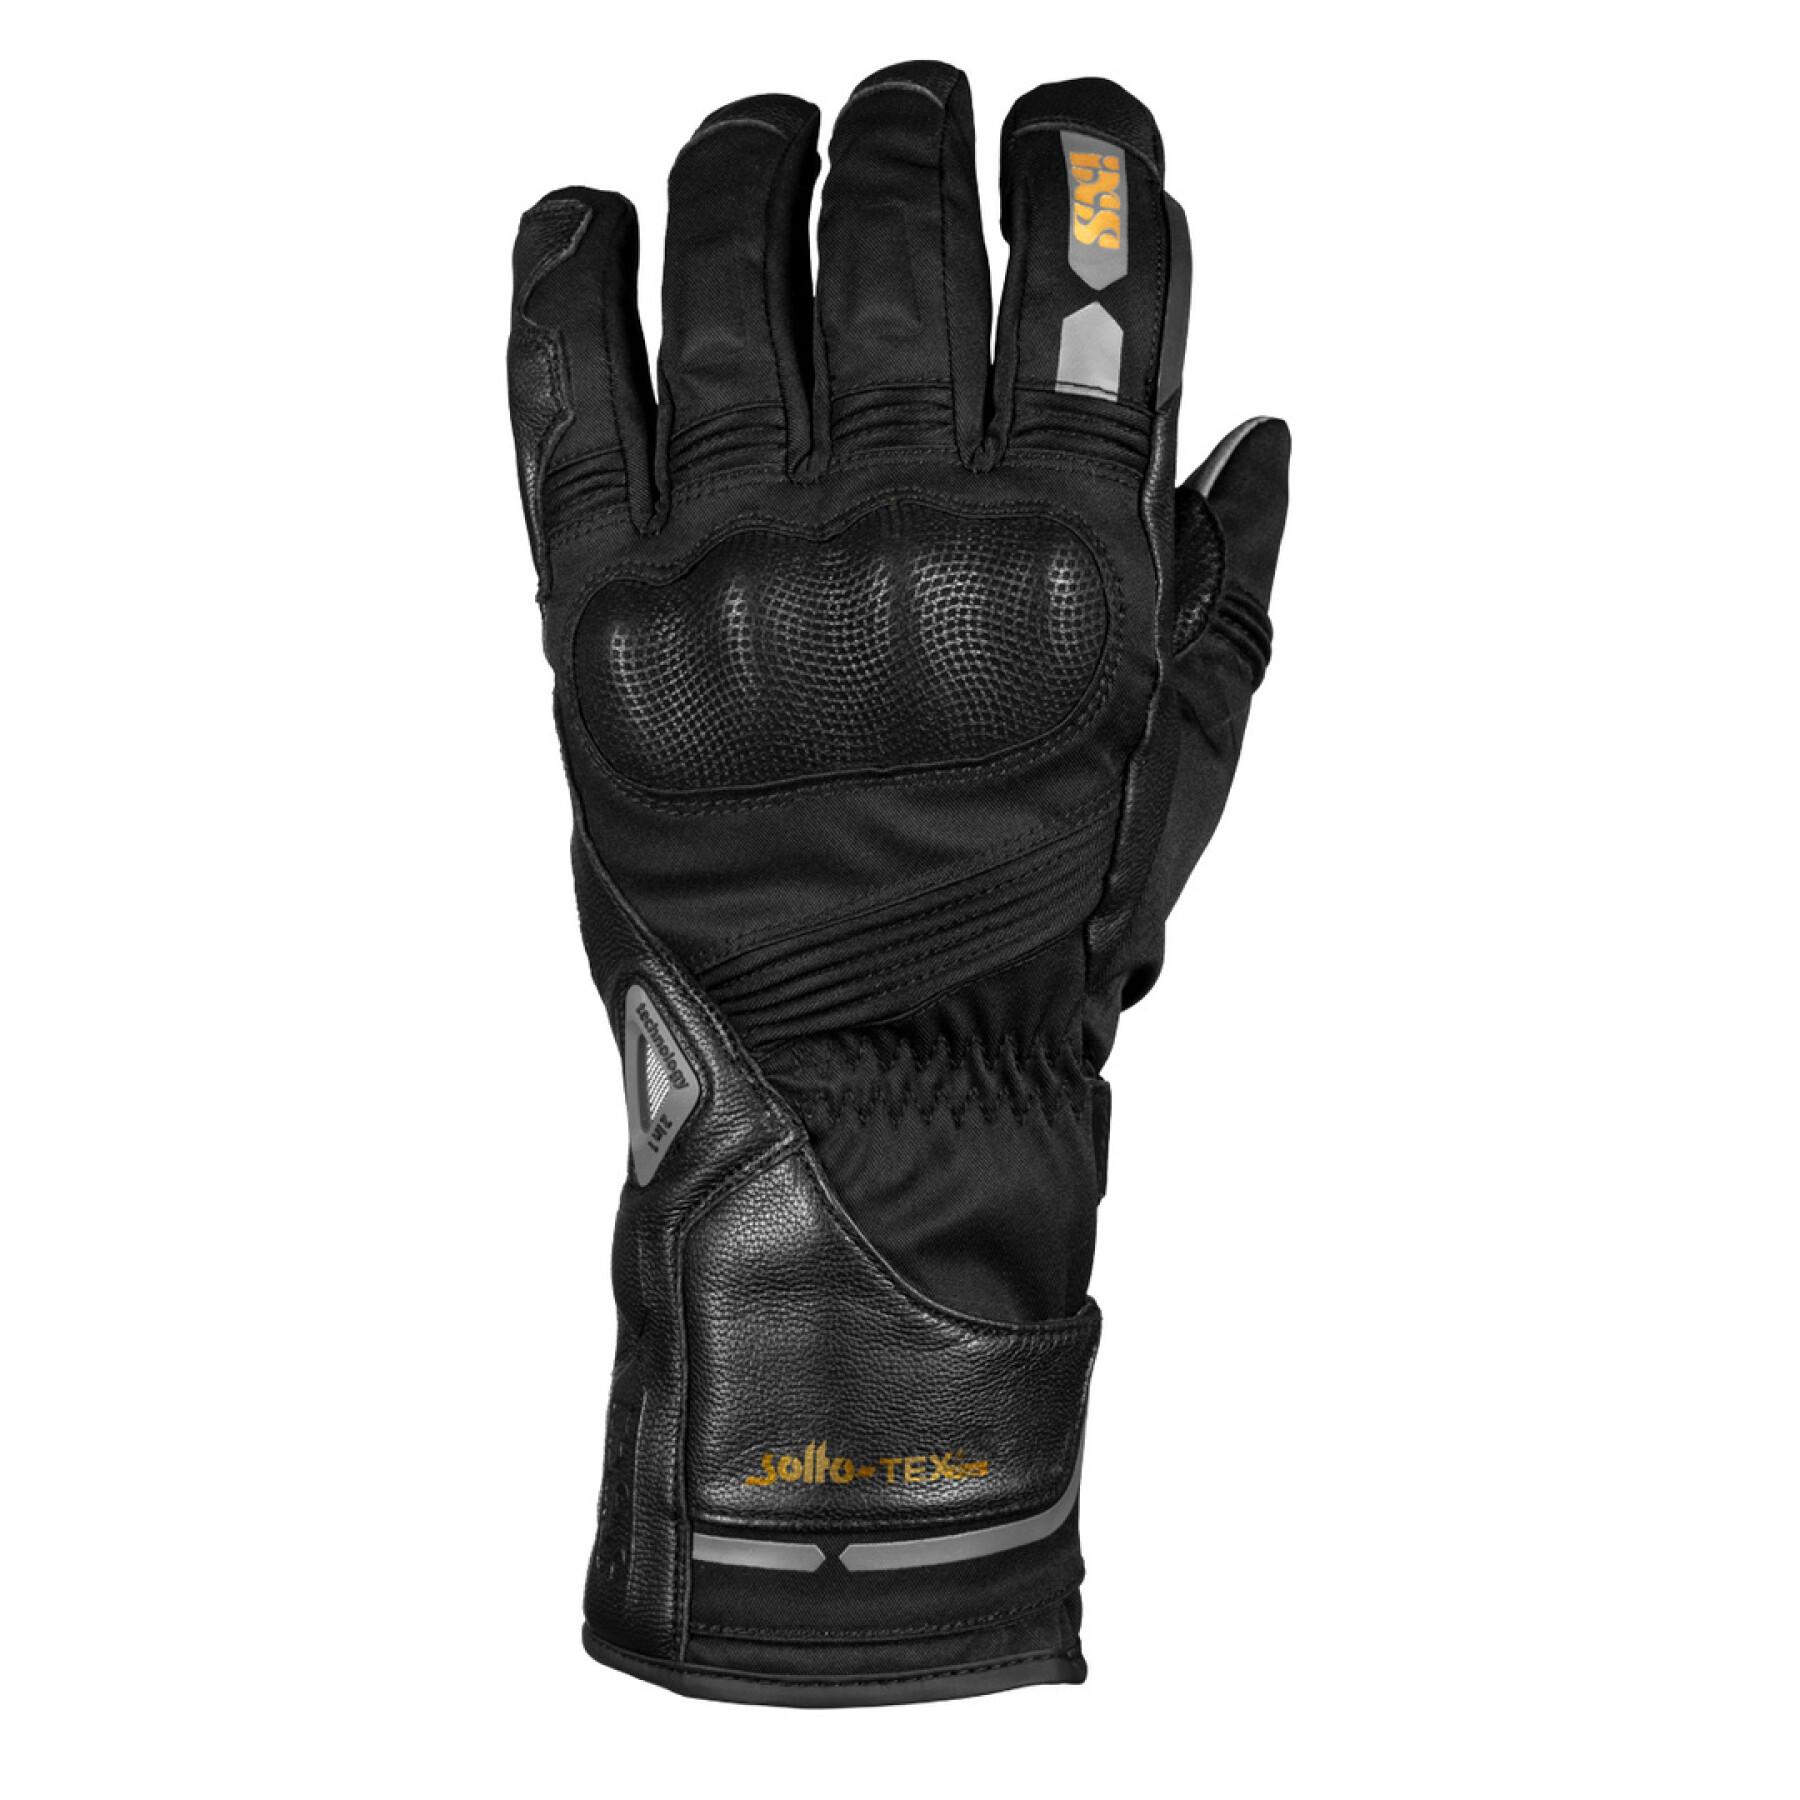 Double glove tower IXS ST+ 1.0